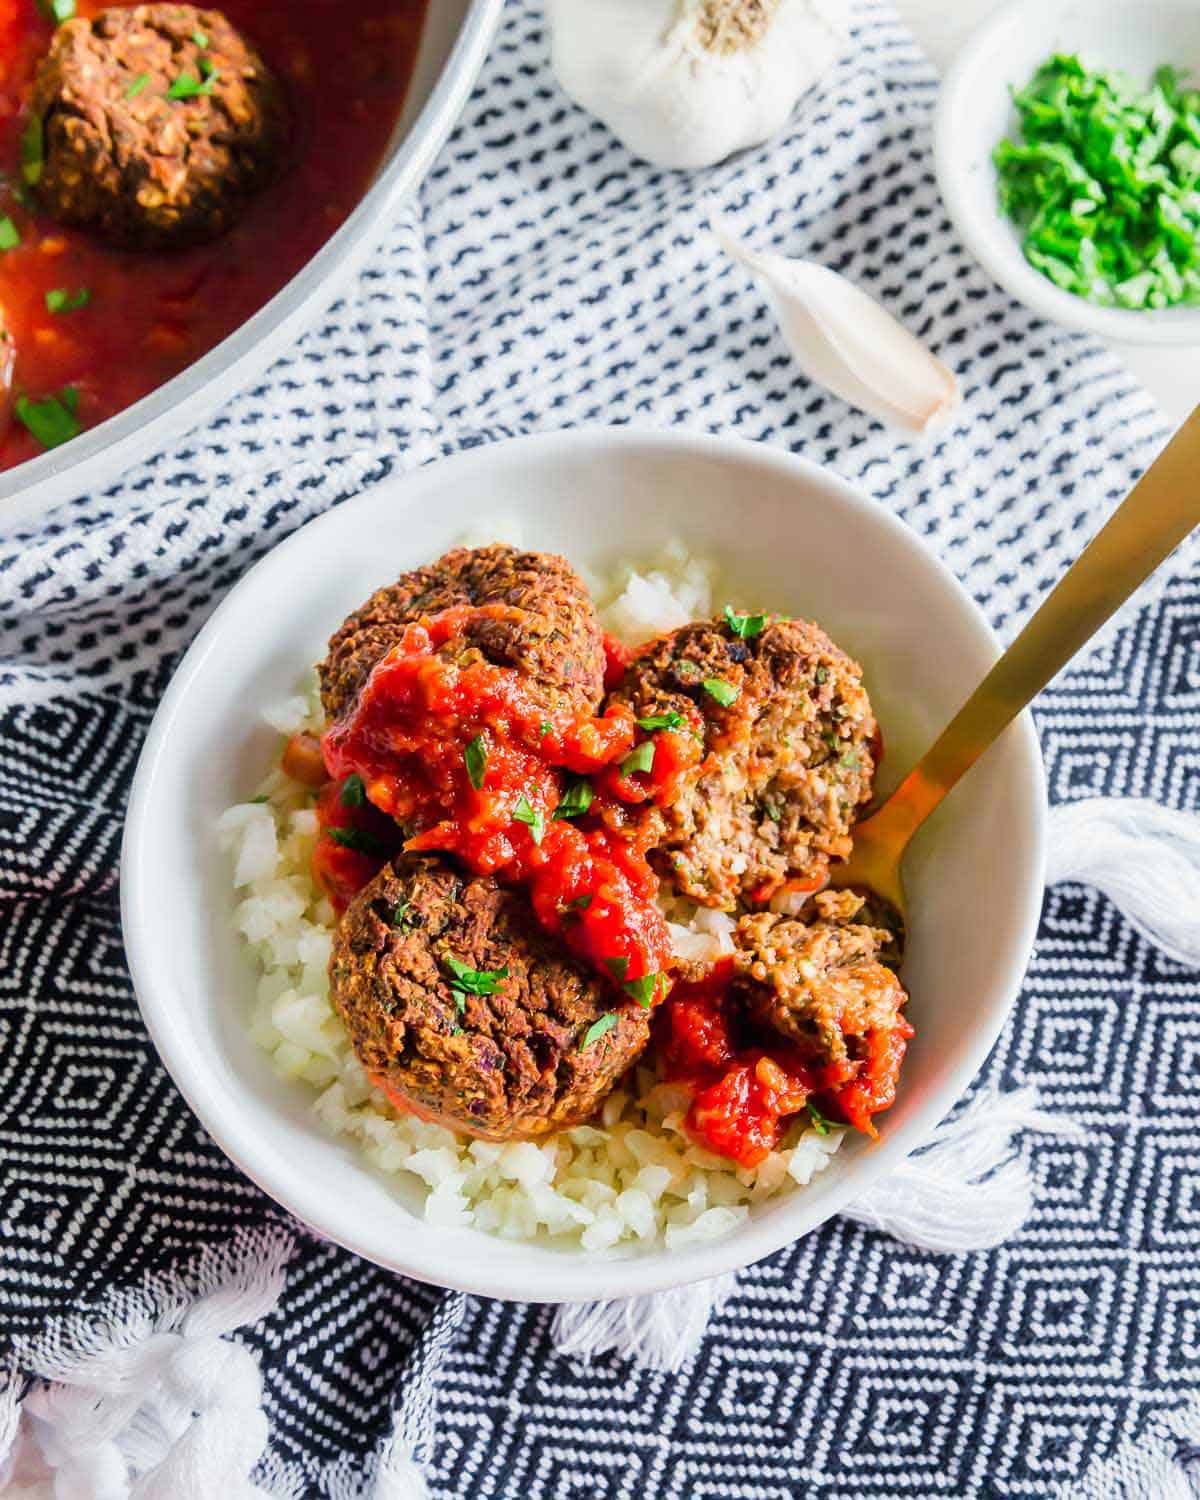 Enjoy these plant based black bean meatballs simmered in tomato sauce over zoodles, pasta or even cauliflower rice for a hearty and comforting meal.